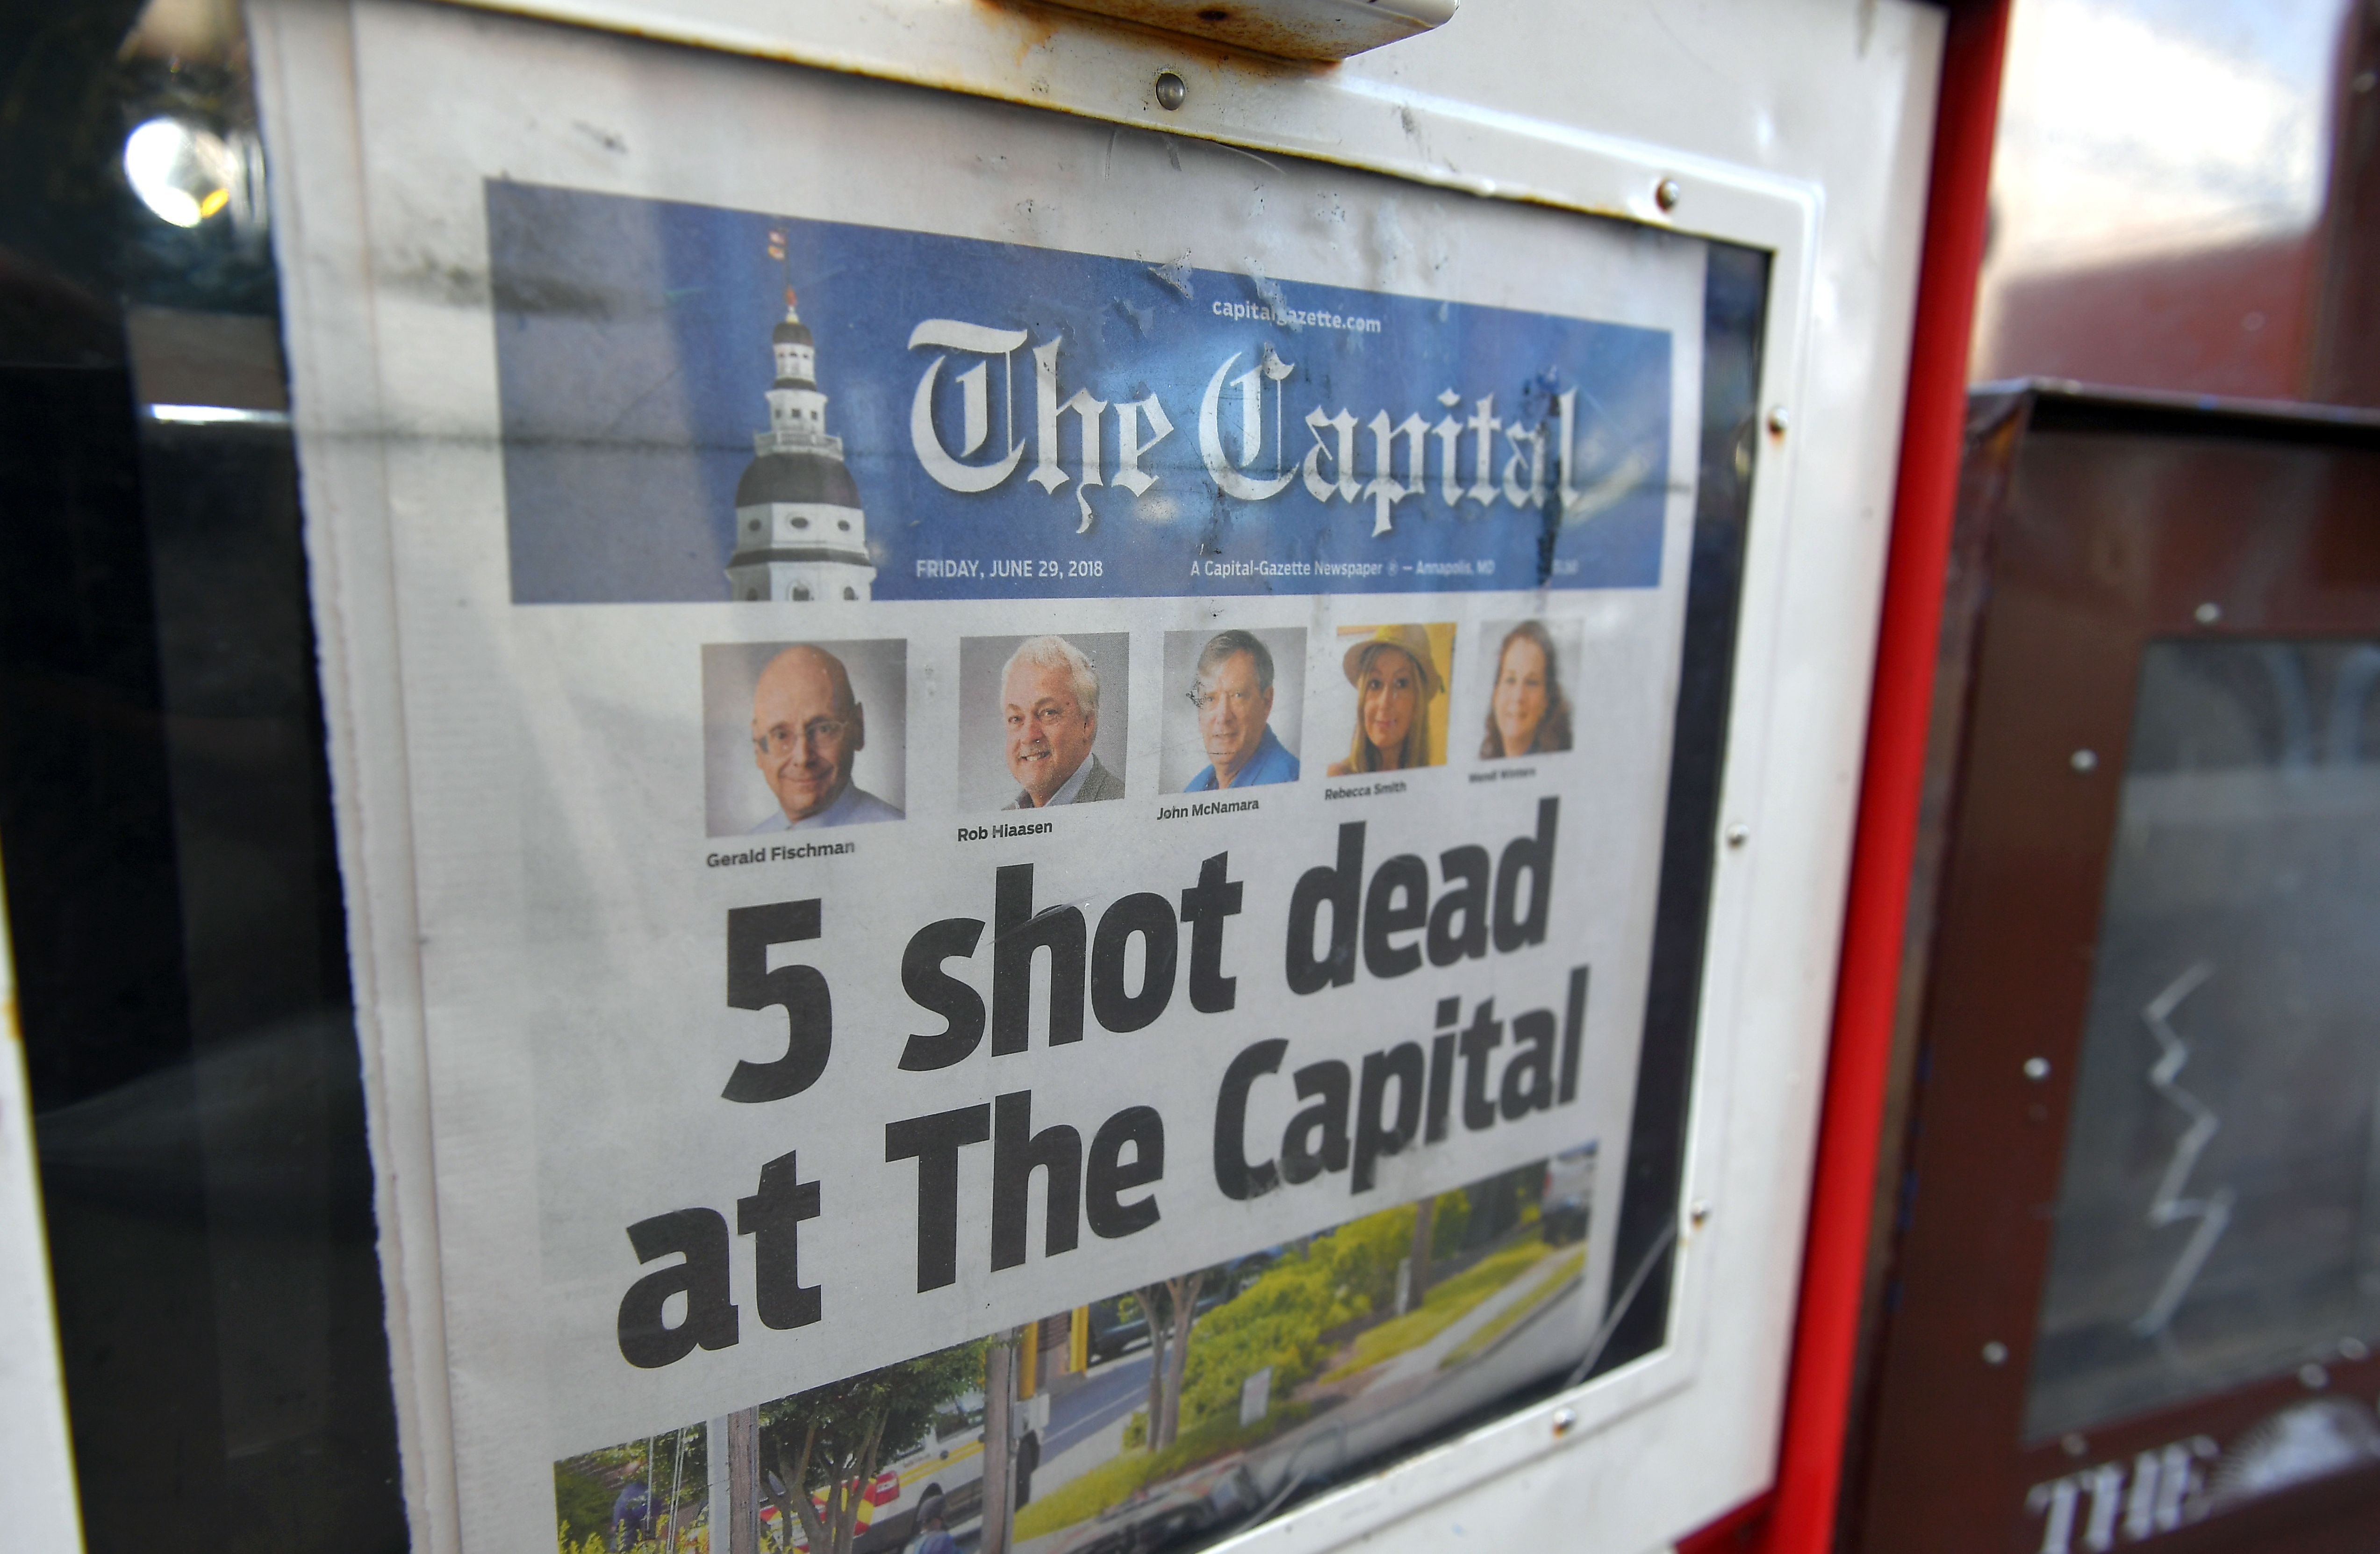 The Capital Gazette of June 29, 2018, is seen in a newspaper vending box in Annapolis, Maryland. (MANDEL NGAN/AFP/Getty Images)